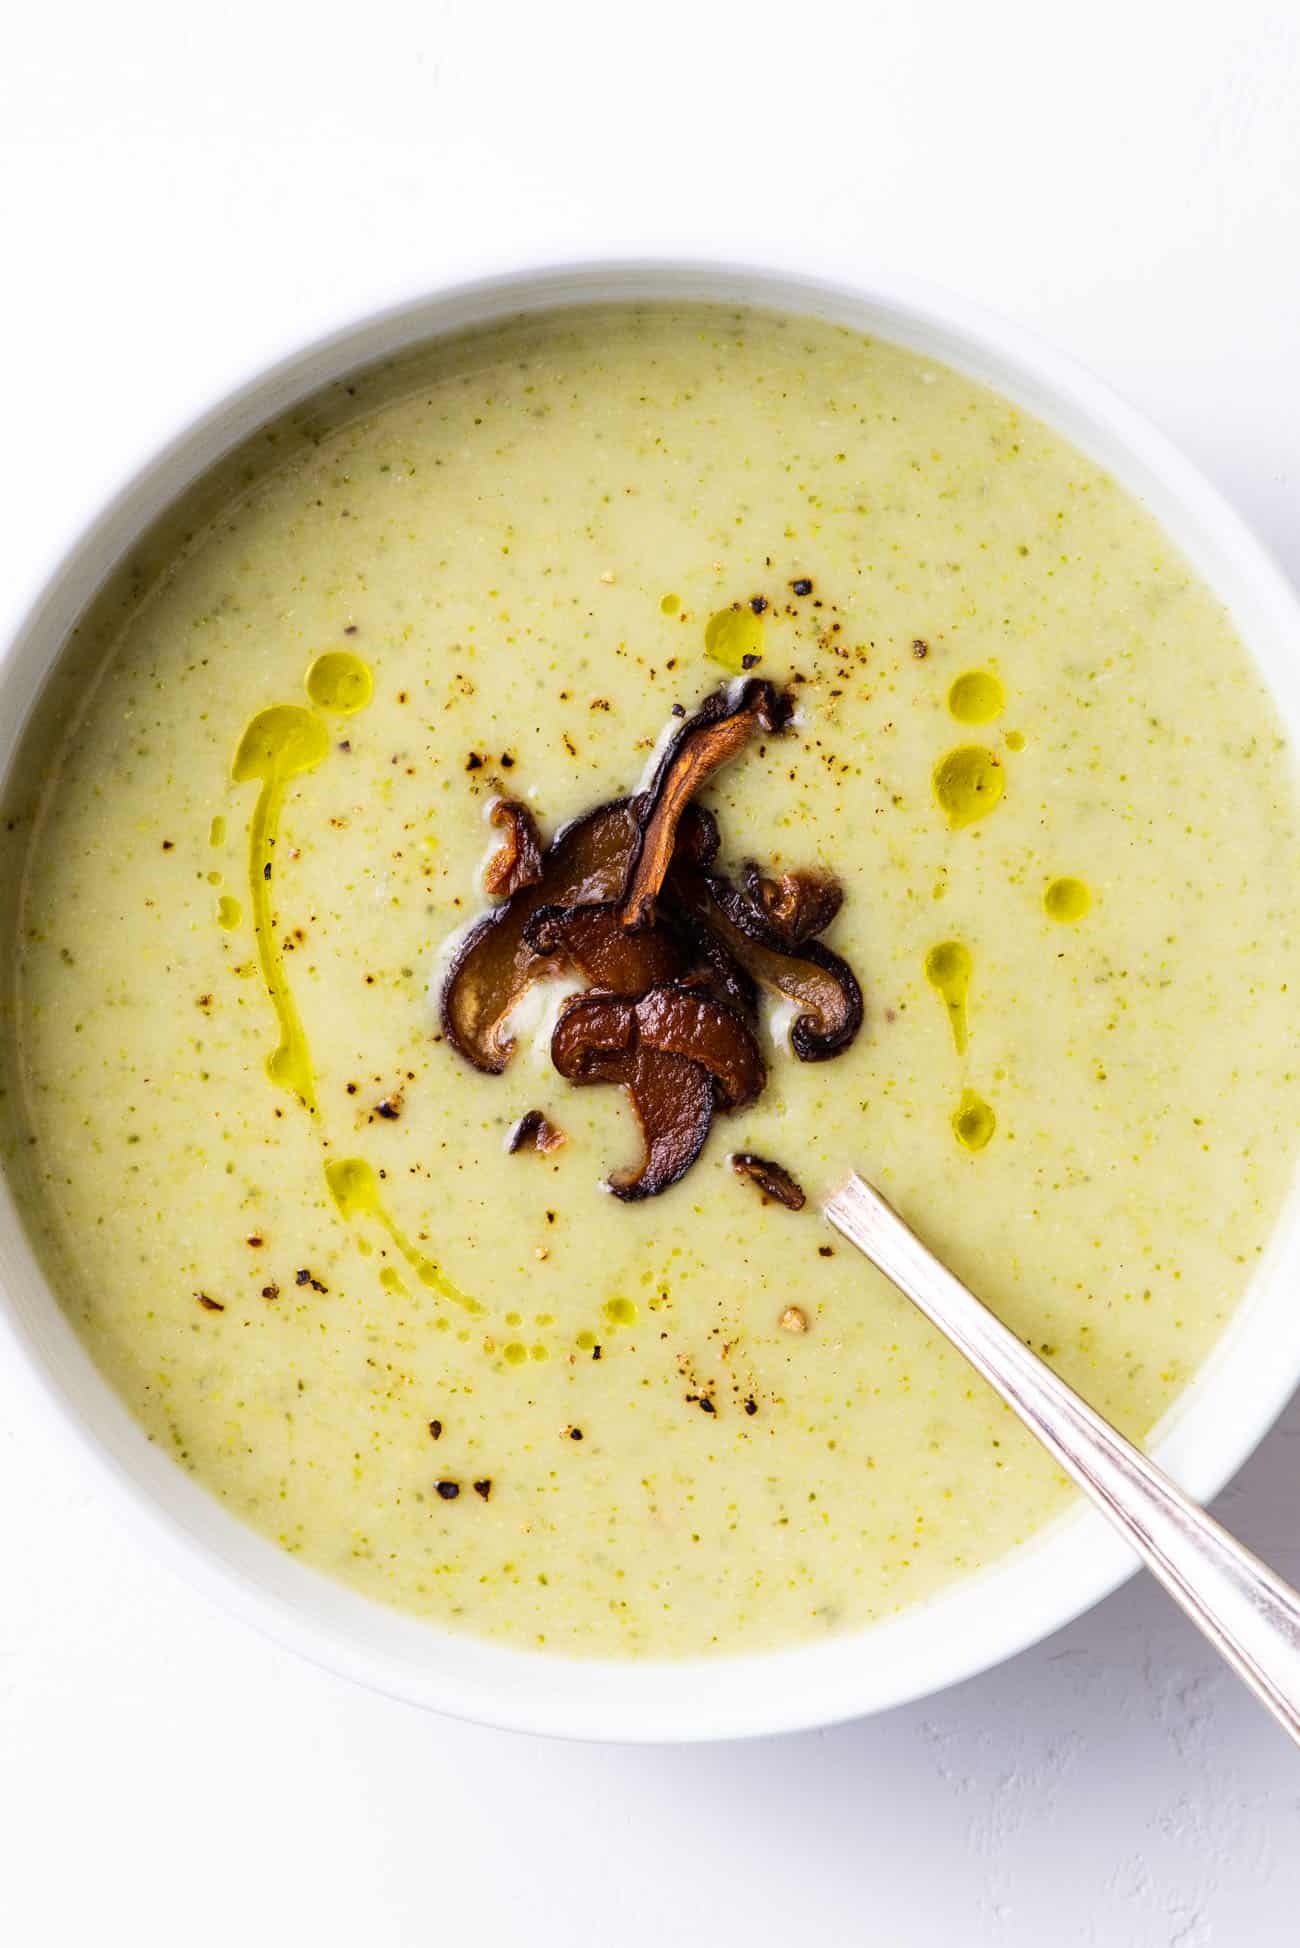 Dairy-free broccoli potato soup garnished with shiitake 'bacon', olive oil, and black pepper, in a white bowl.